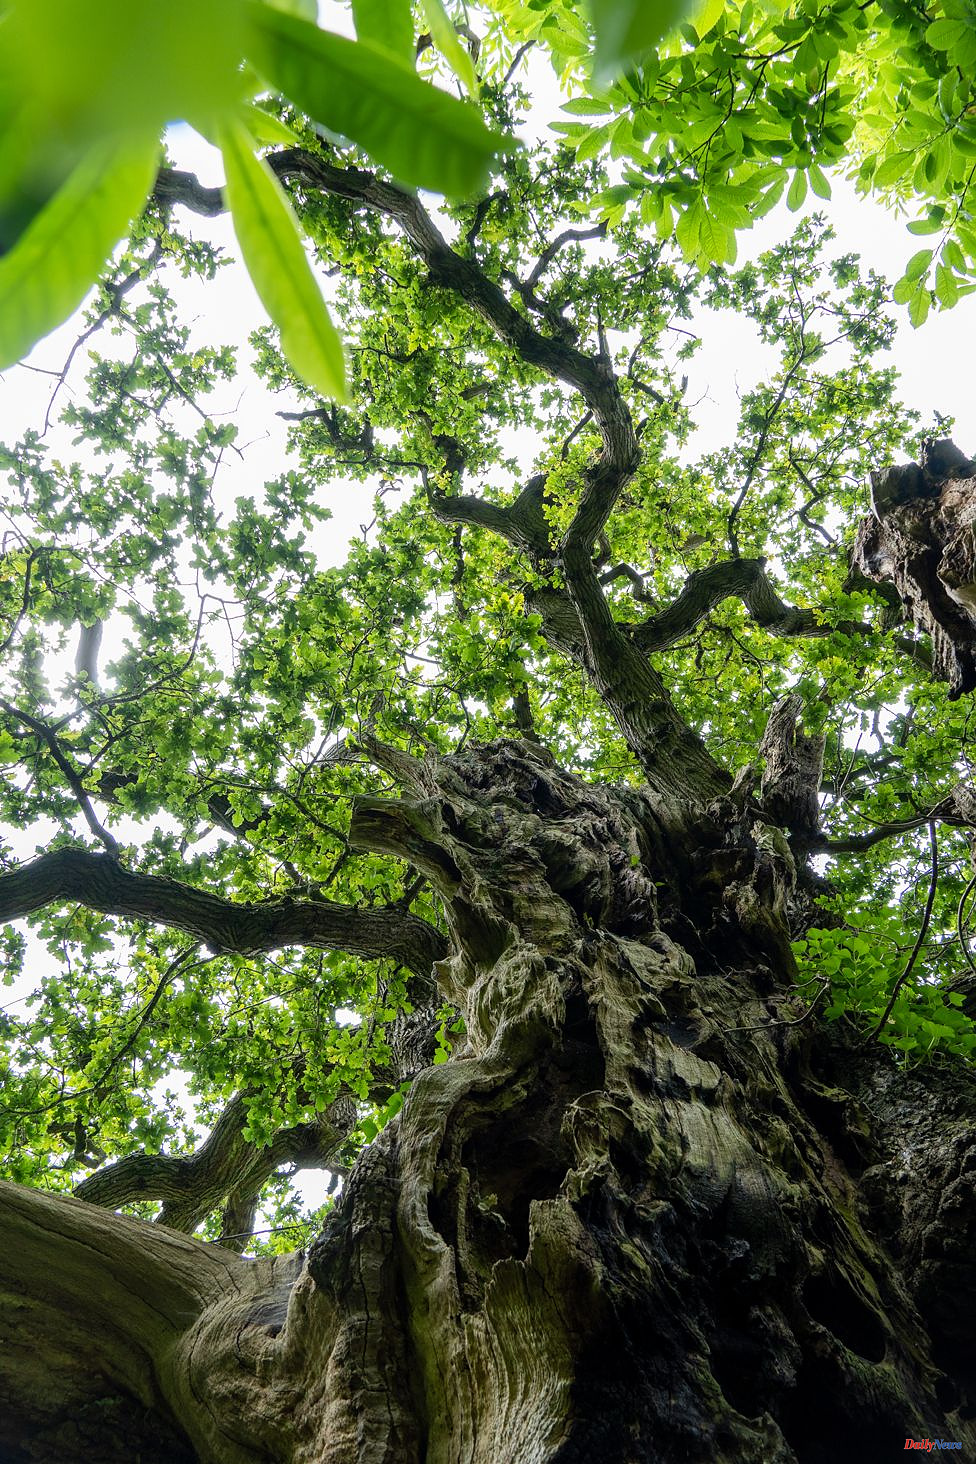 Conservation opportunities presented by a new map of ancient trees